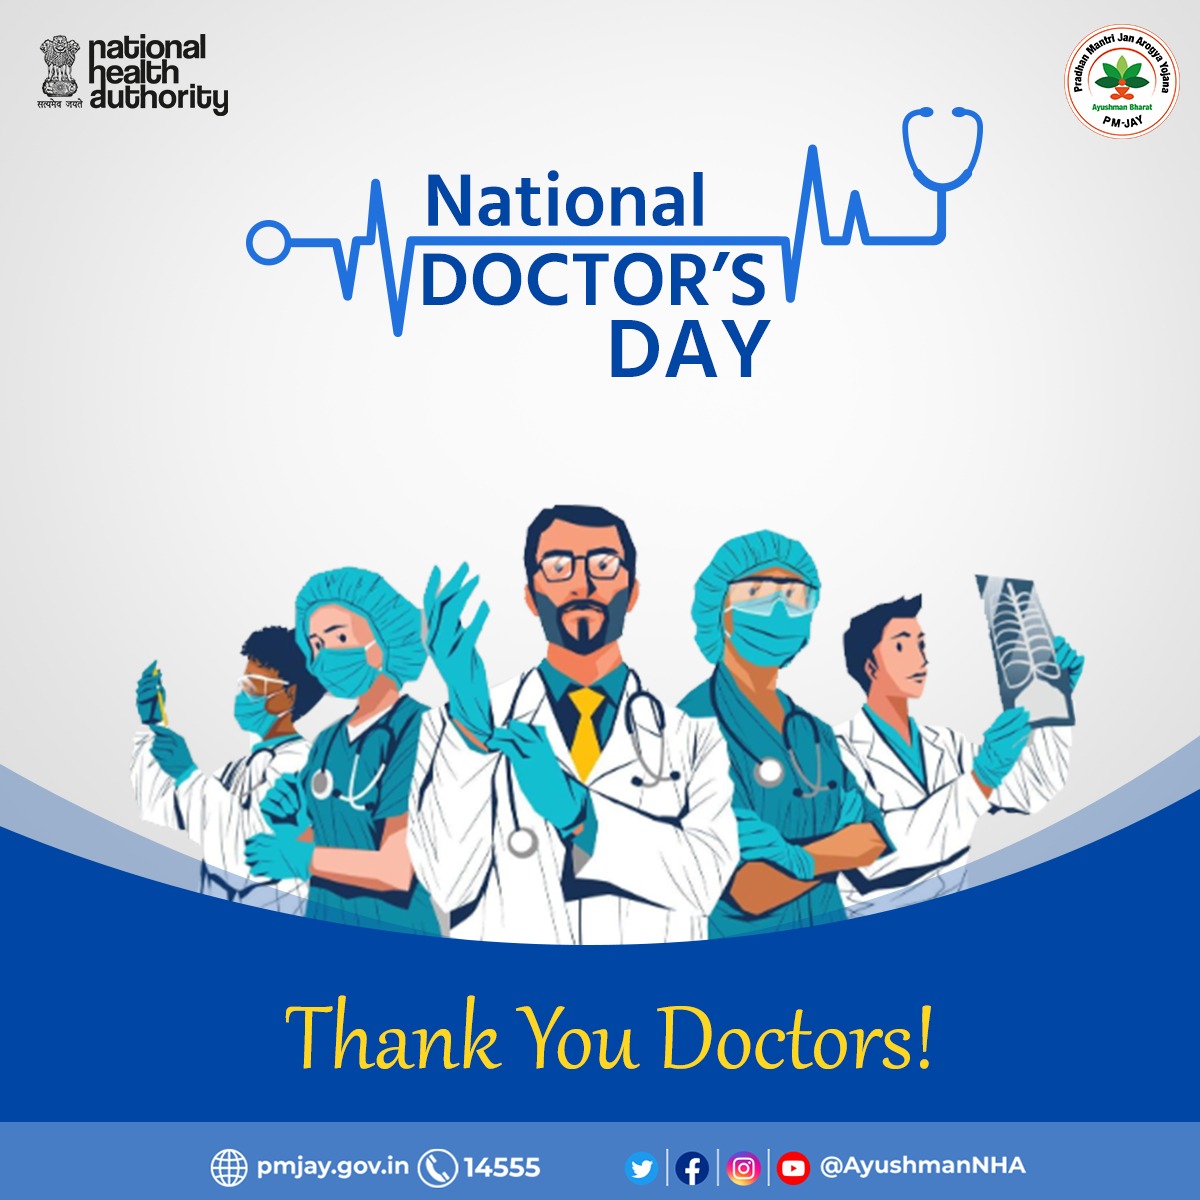 On this #NationalDoctorsDay, NHA extends heartfelt wishes to the true Heroes of India.

Thank you Doctors for your constant support in building an #AyushmanBharat and providing an equal healthcare for all. We celebrate you today and every day!

#HealingHeroes #digitalhealth